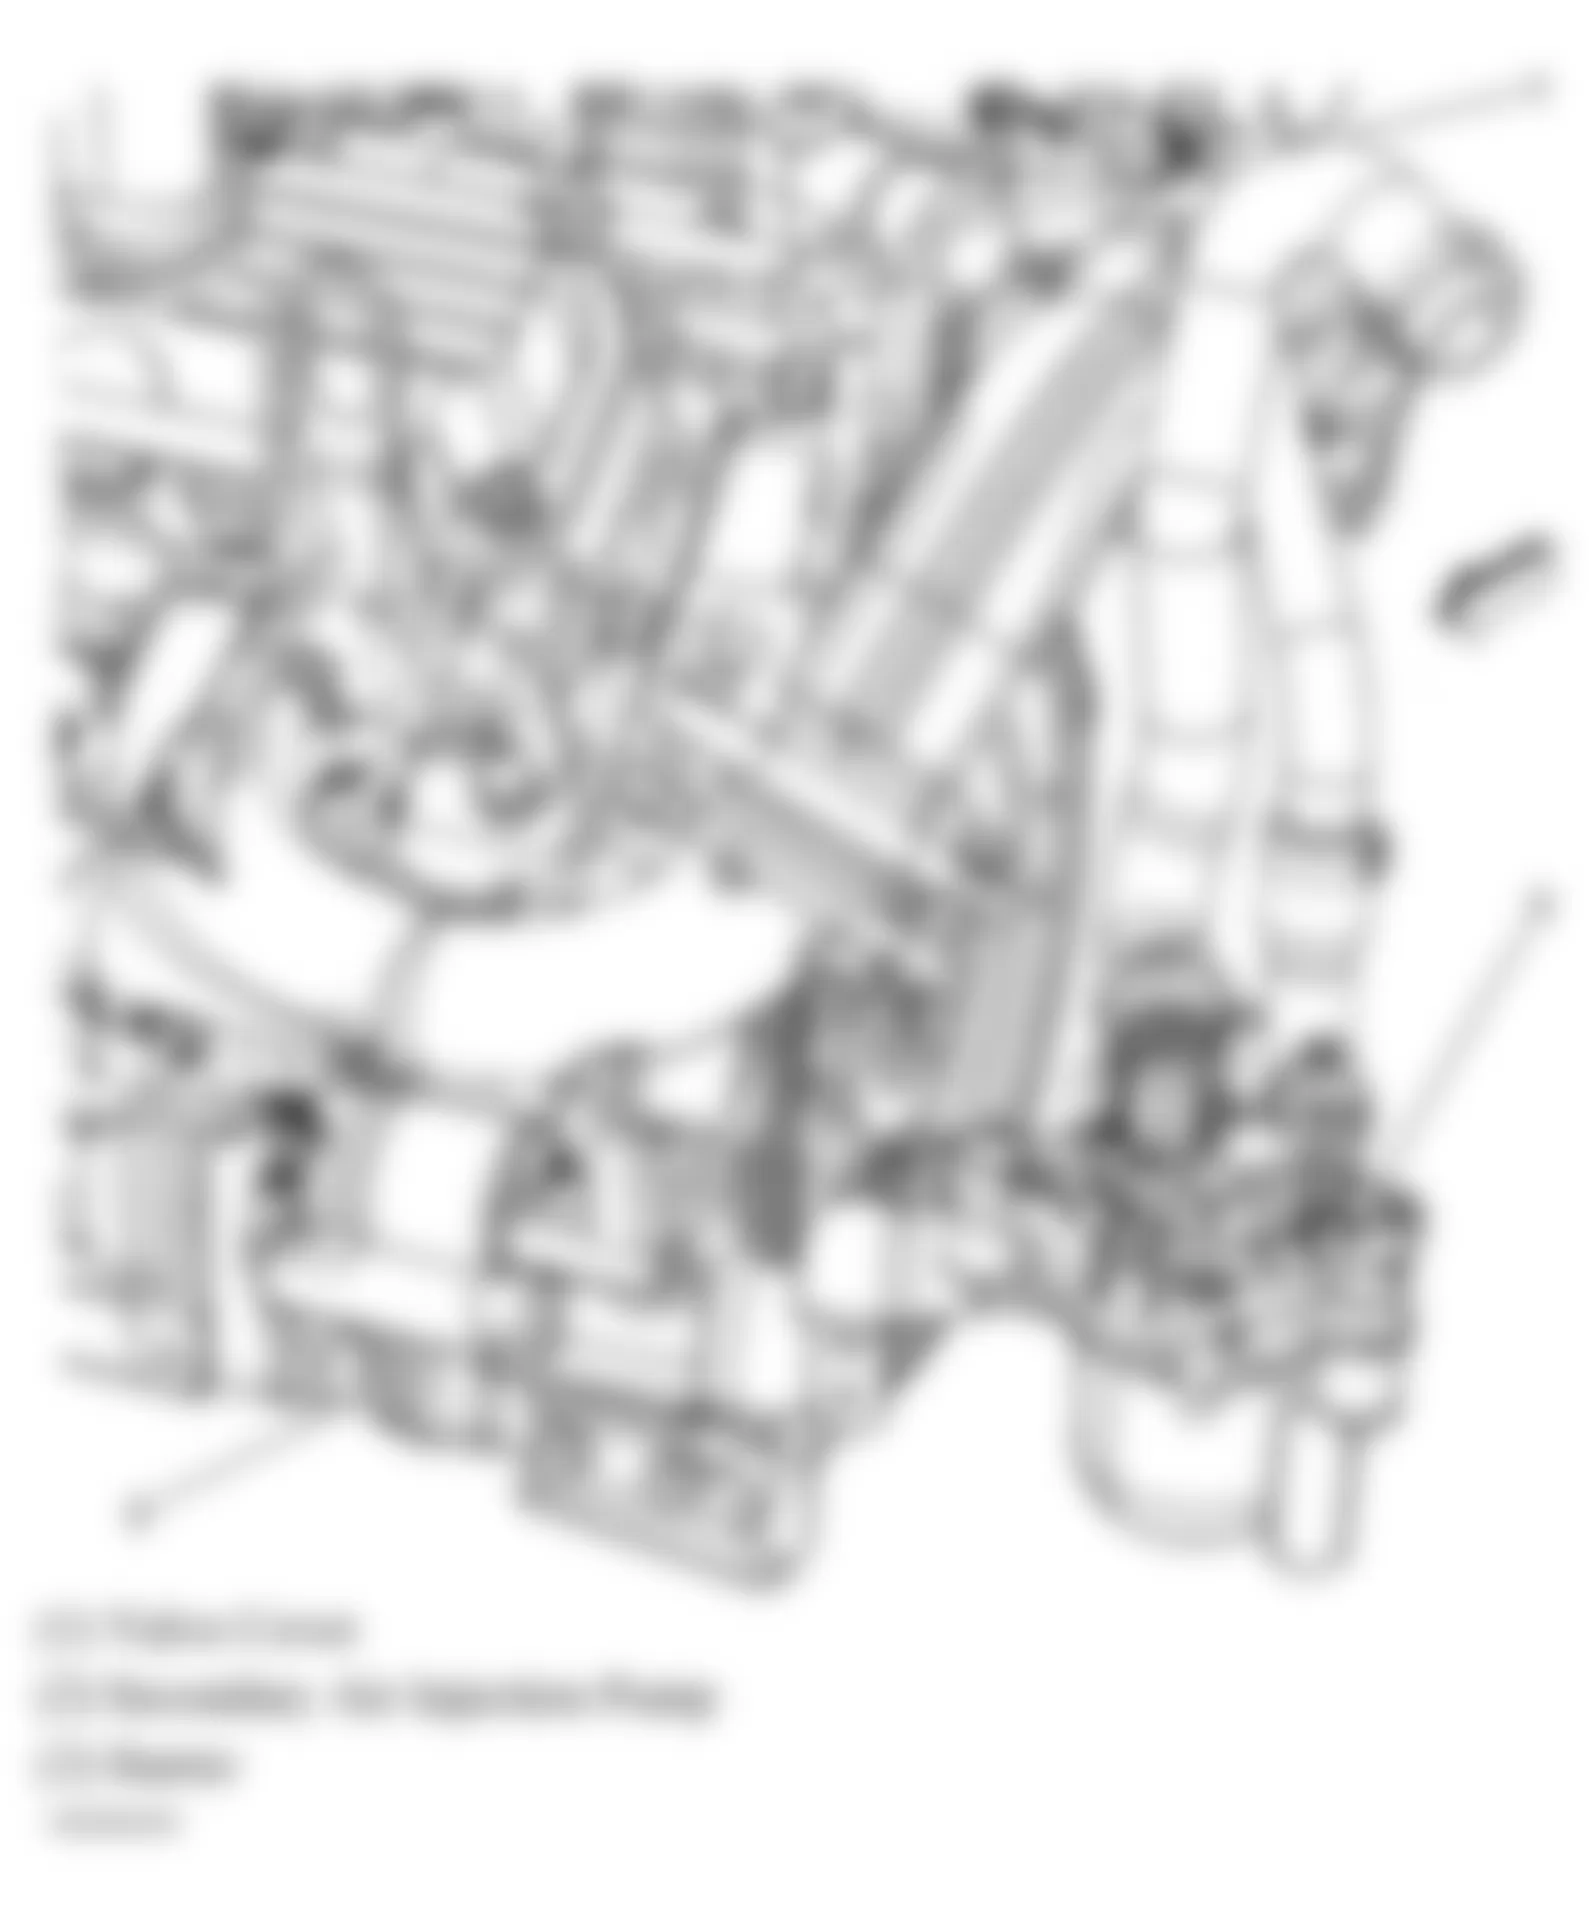 Buick Allure CX 2006 - Component Locations -  Left Rear Of Engine (3.8L)